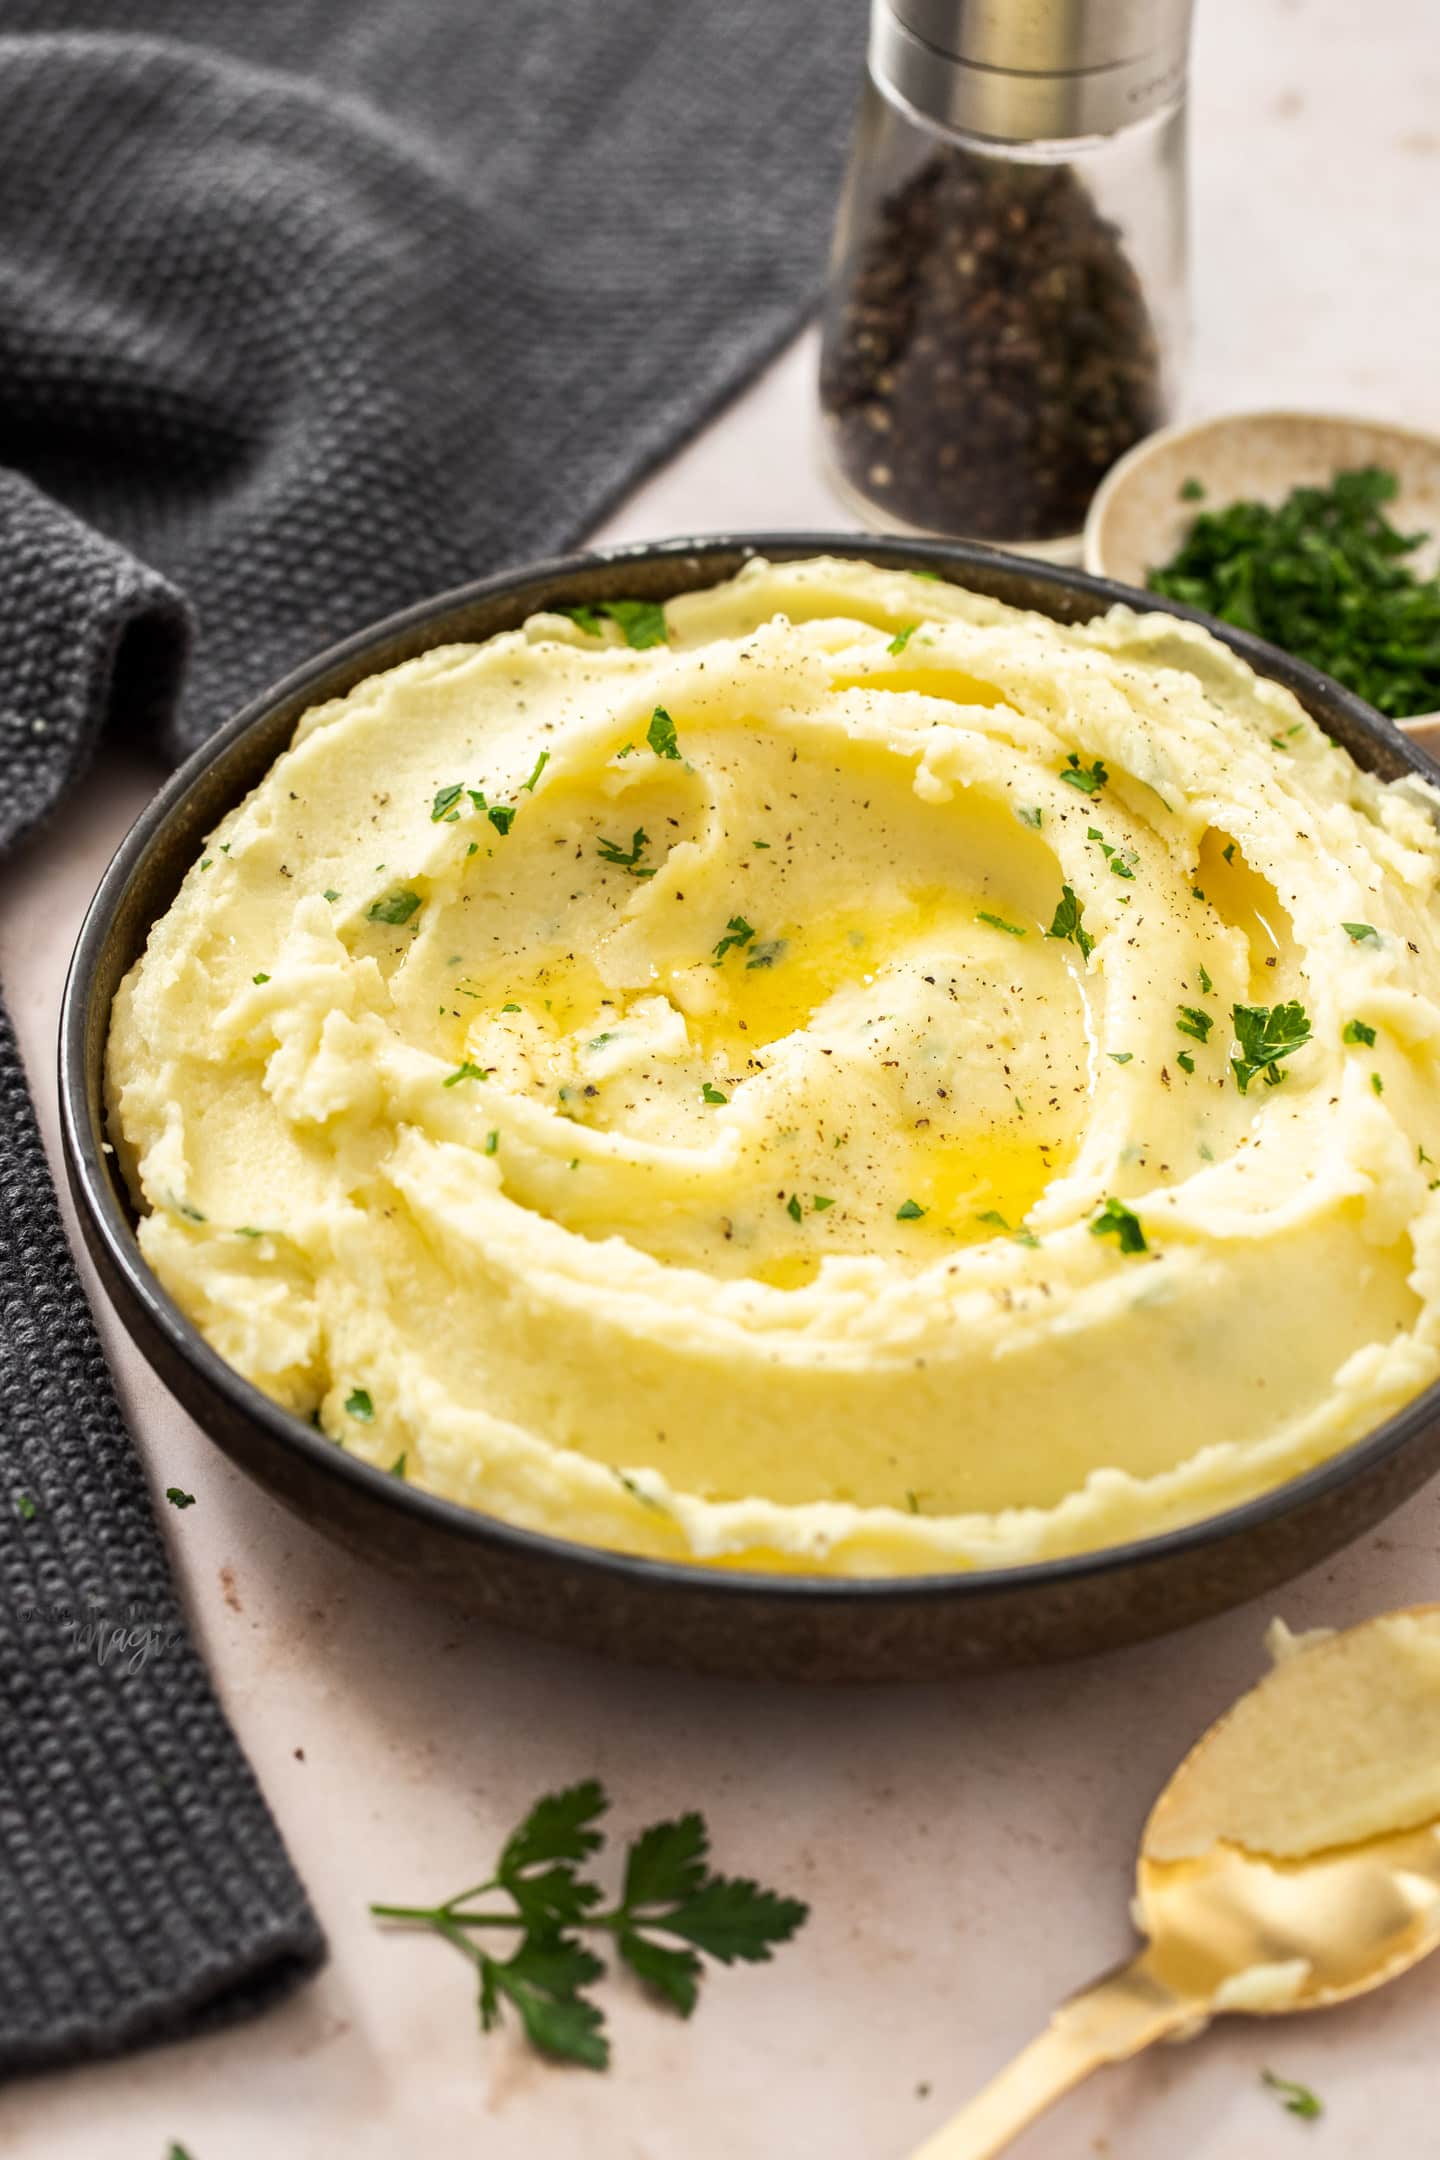 Creamy mashed potato in a bowl.